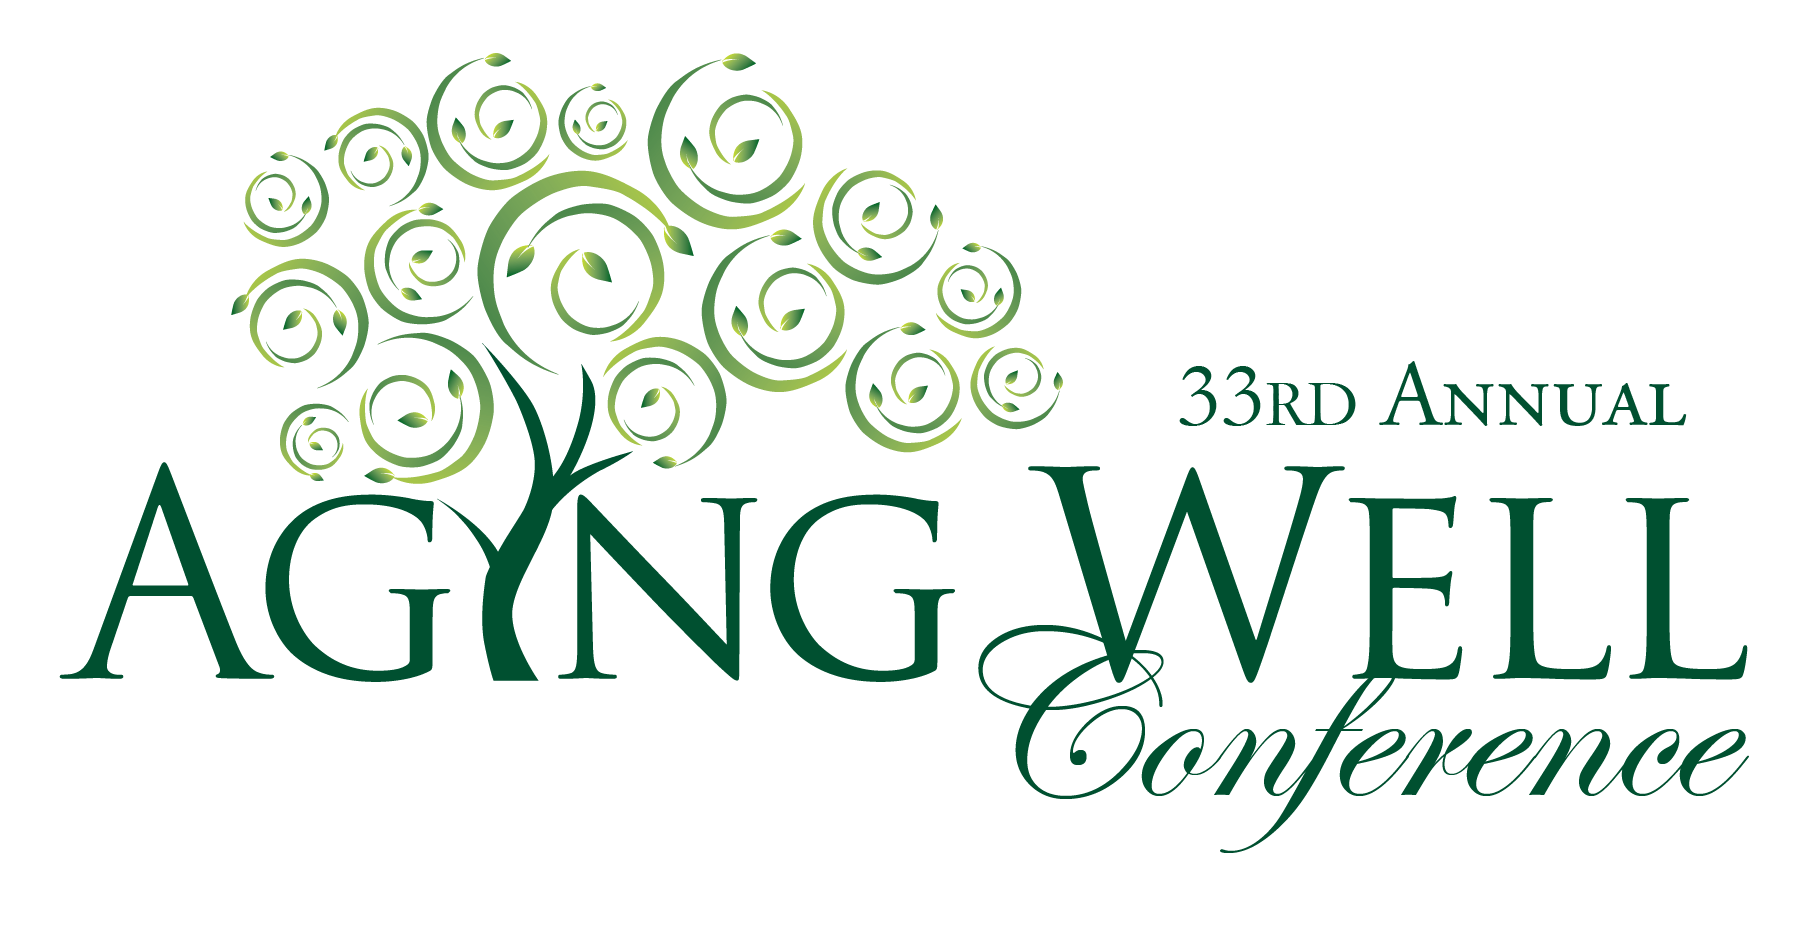 33rd Aging Well Logo